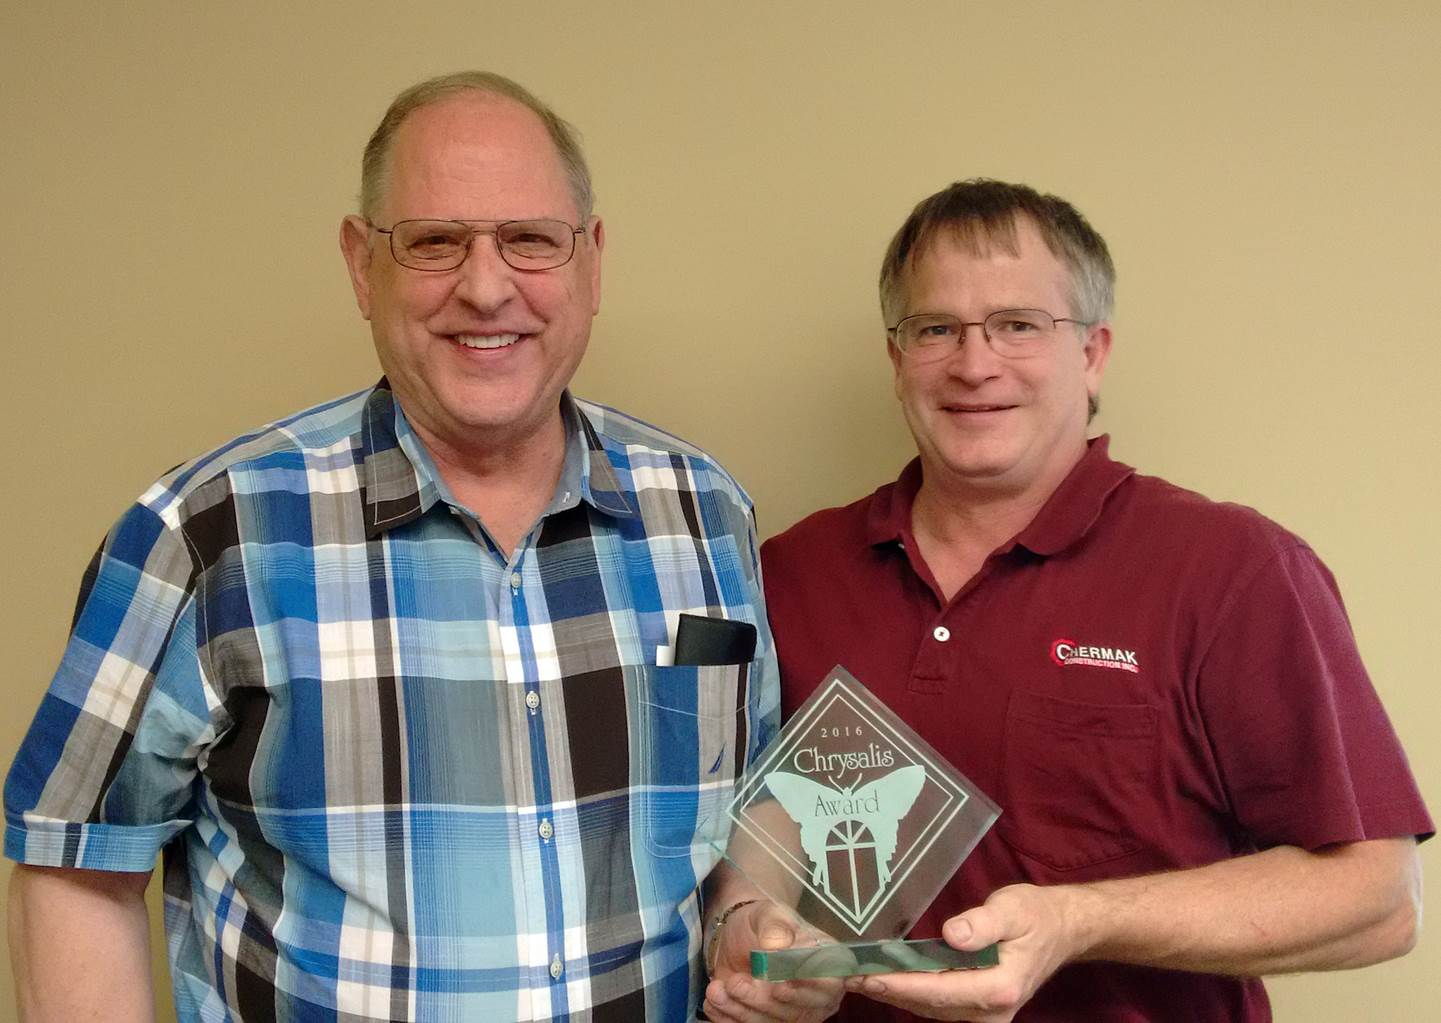 Howard Chermak, president, and Jon Elkins, project developer, of Chermak Construction hold Chrysalis Awards for Remodeling Excellence. The Edmonds firm won one of the awards for the third time in six years.